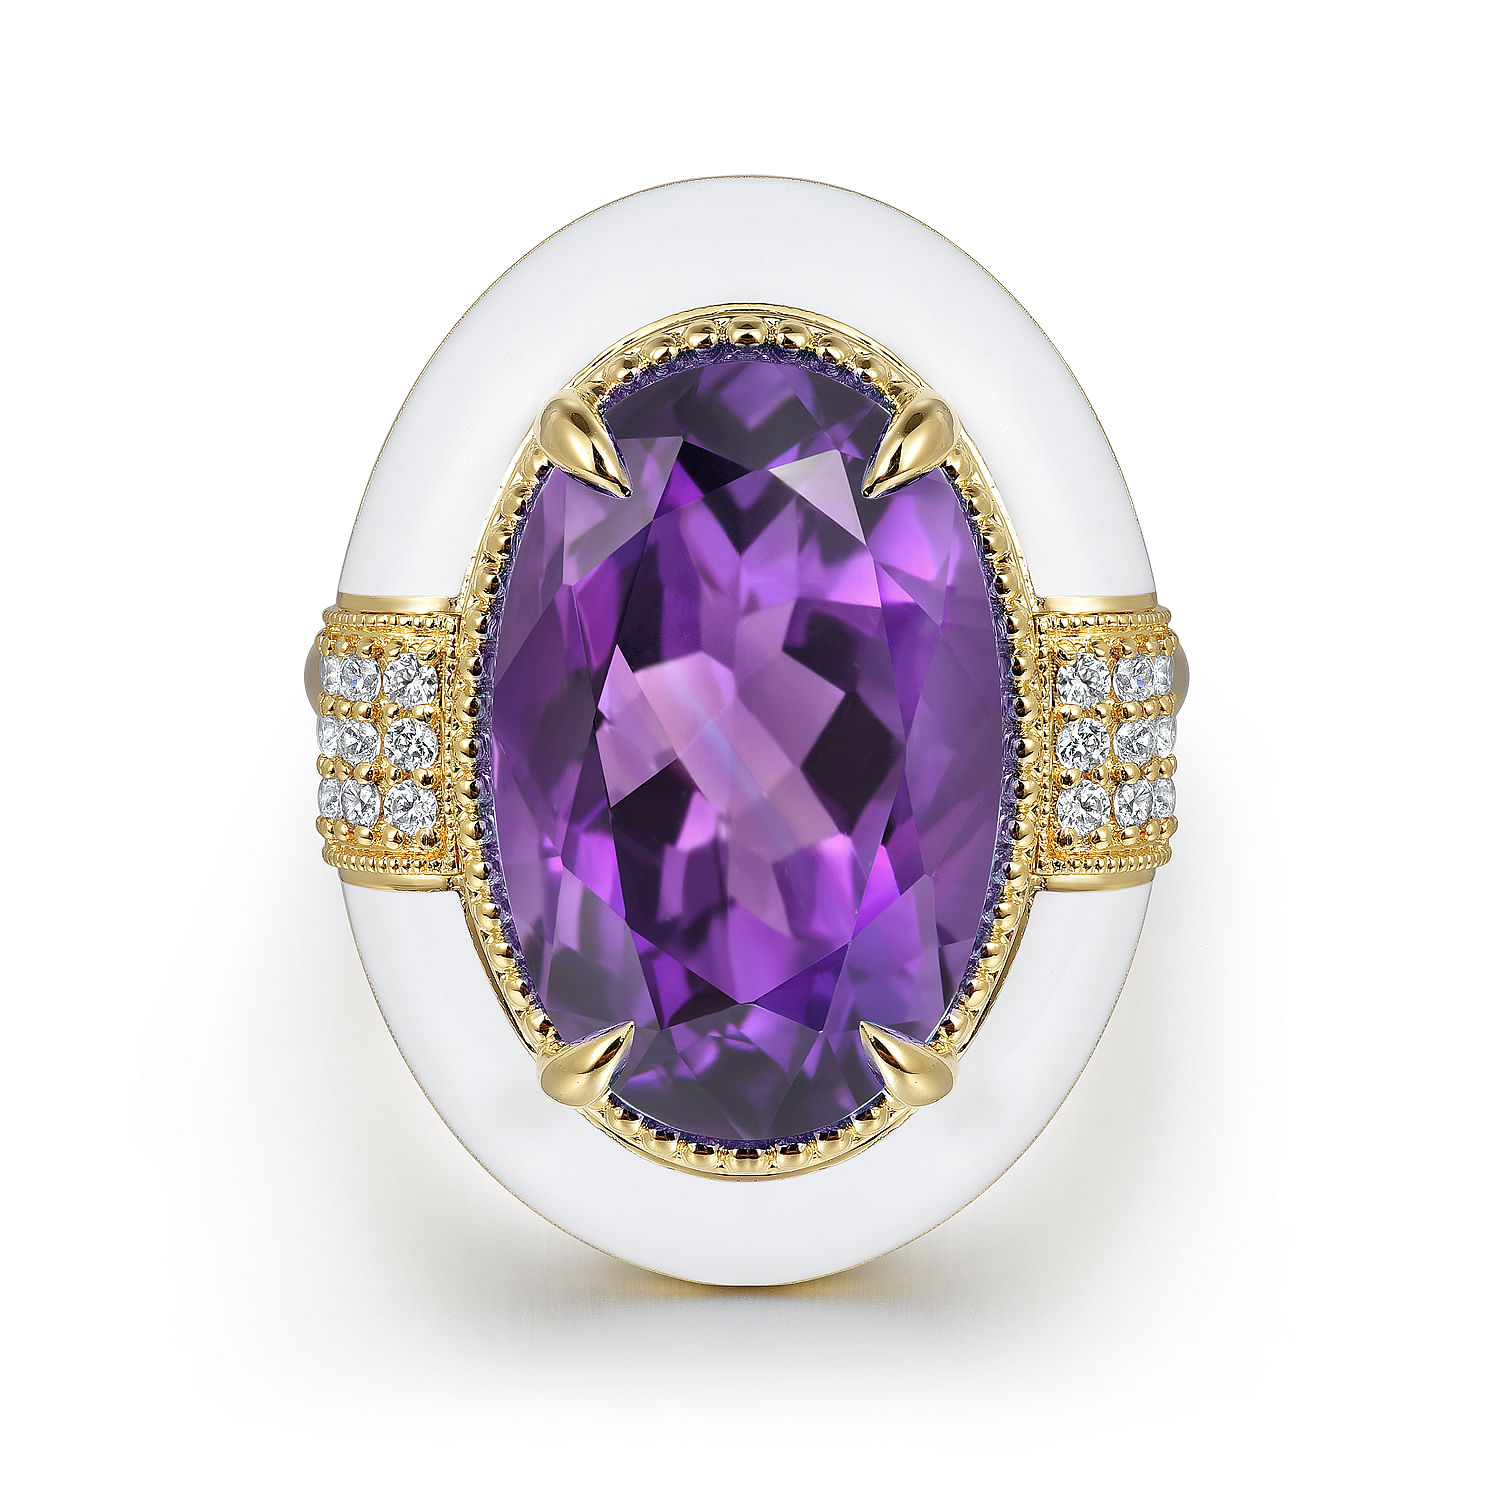 14K Yellow Gold Diamond and Amethyst Fashion Ring With White Enamel